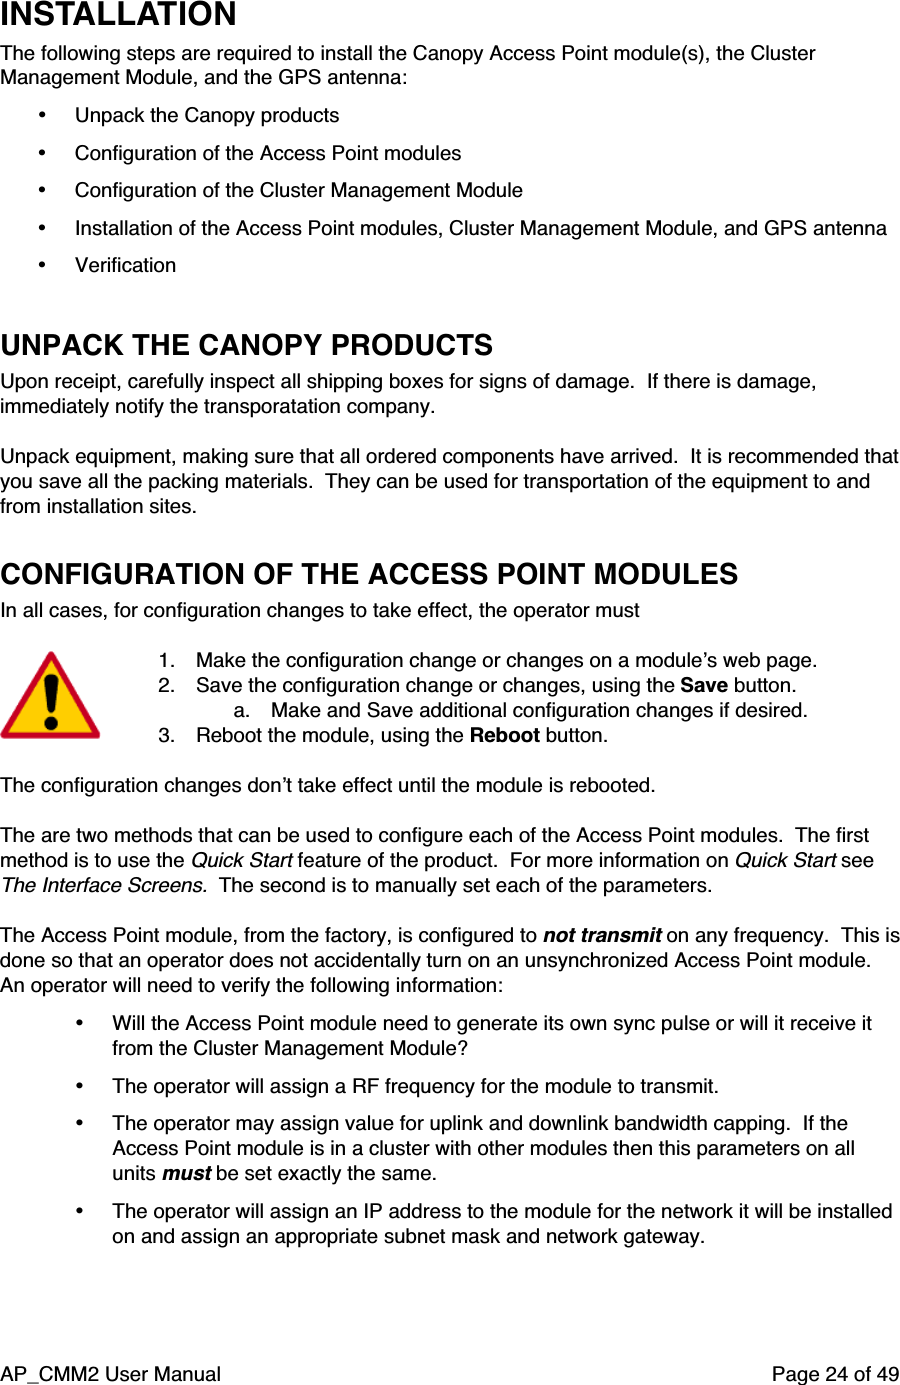 AP_CMM2 User Manual Page 24 of 49INSTALLATIONThe following steps are required to install the Canopy Access Point module(s), the ClusterManagement Module, and the GPS antenna:• Unpack the Canopy products• Configuration of the Access Point modules• Configuration of the Cluster Management Module• Installation of the Access Point modules, Cluster Management Module, and GPS antenna• VerificationUNPACK THE CANOPY PRODUCTSUpon receipt, carefully inspect all shipping boxes for signs of damage.  If there is damage,immediately notify the transporatation company.Unpack equipment, making sure that all ordered components have arrived.  It is recommended thatyou save all the packing materials.  They can be used for transportation of the equipment to andfrom installation sites.CONFIGURATION OF THE ACCESS POINT MODULESIn all cases, for configuration changes to take effect, the operator must1. Make the configuration change or changes on a module’s web page.2. Save the configuration change or changes, using the Save button.a. Make and Save additional configuration changes if desired.3. Reboot the module, using the Reboot button.The configuration changes don’t take effect until the module is rebooted.The are two methods that can be used to configure each of the Access Point modules.  The firstmethod is to use the Quick Start feature of the product.  For more information on Quick Start seeThe Interface Screens.  The second is to manually set each of the parameters.The Access Point module, from the factory, is configured to not transmit on any frequency.  This isdone so that an operator does not accidentally turn on an unsynchronized Access Point module.An operator will need to verify the following information:• Will the Access Point module need to generate its own sync pulse or will it receive itfrom the Cluster Management Module?• The operator will assign a RF frequency for the module to transmit.• The operator may assign value for uplink and downlink bandwidth capping.  If theAccess Point module is in a cluster with other modules then this parameters on allunits must be set exactly the same.• The operator will assign an IP address to the module for the network it will be installedon and assign an appropriate subnet mask and network gateway.